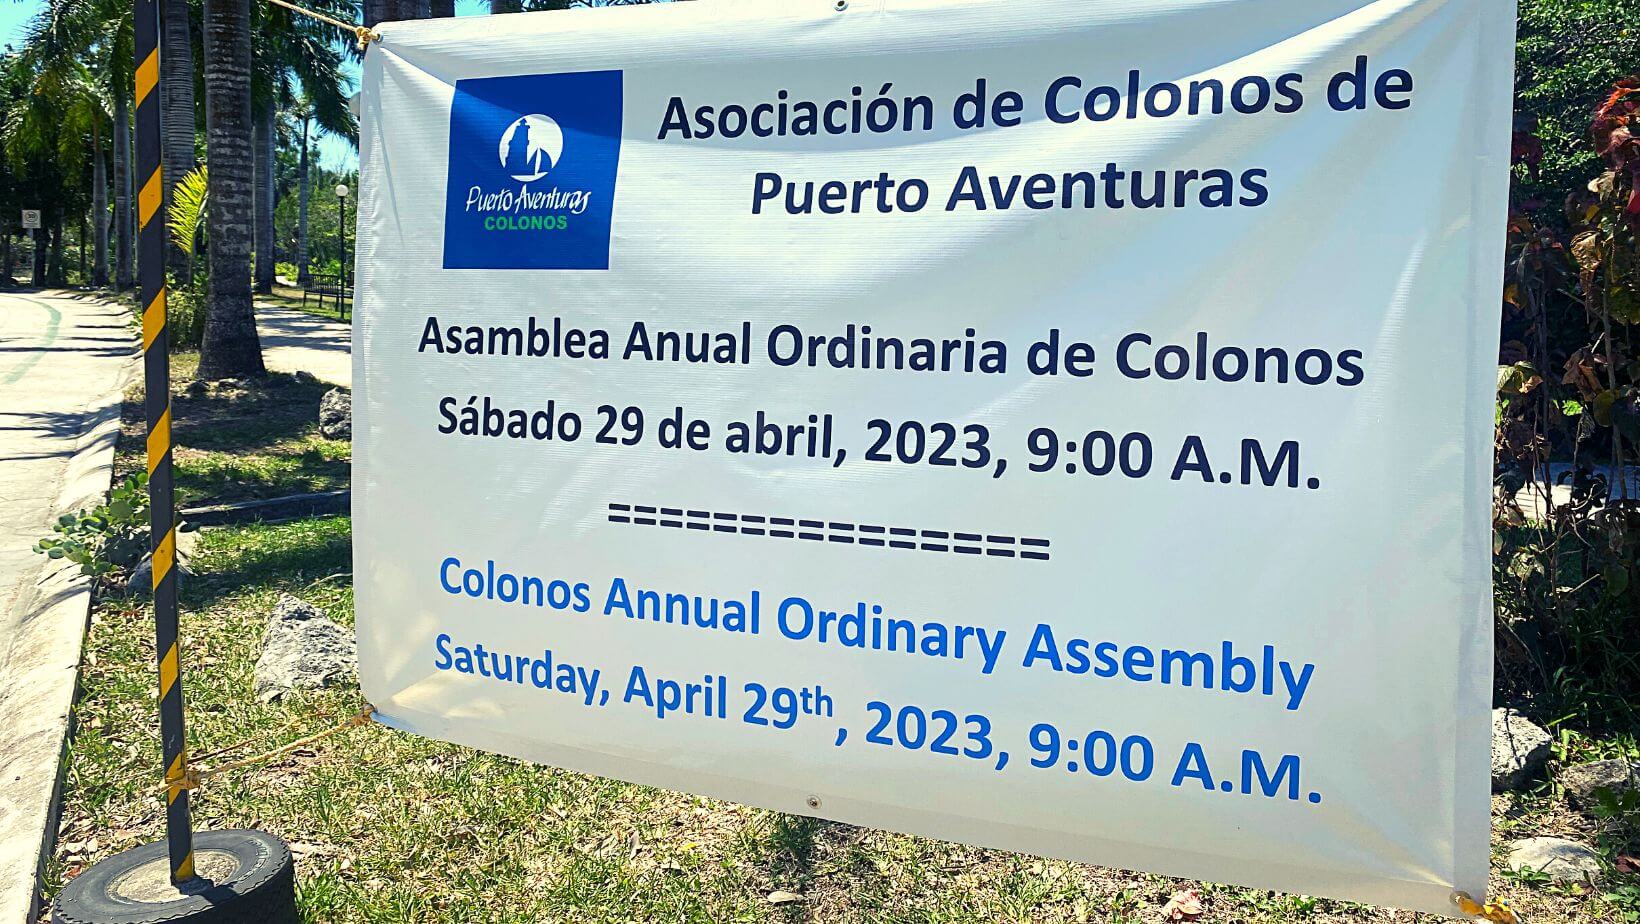 The sign for the Puerto Aventuras Colonos Ordinary Assembly in Puerto Aventuras